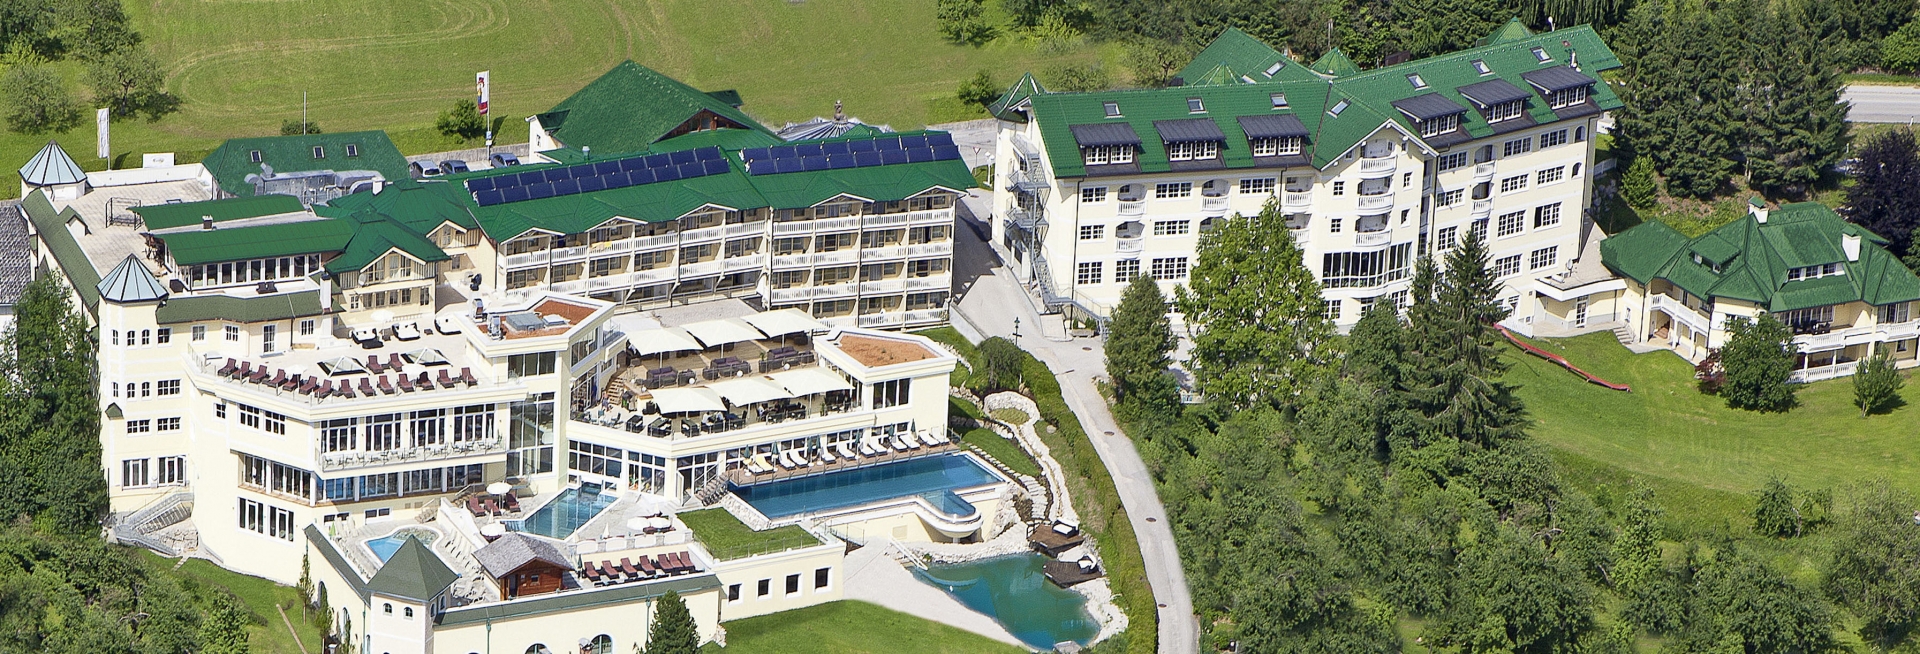 Wellness-Golf-Familien-Hotel Dilly <br/>262.00 ew <br/> <a href='http://vakantieoplossing.nl/outpage/?id=fa858bdc0de943521596ae221bb5cb4a' target='_blank'>View Details</a>